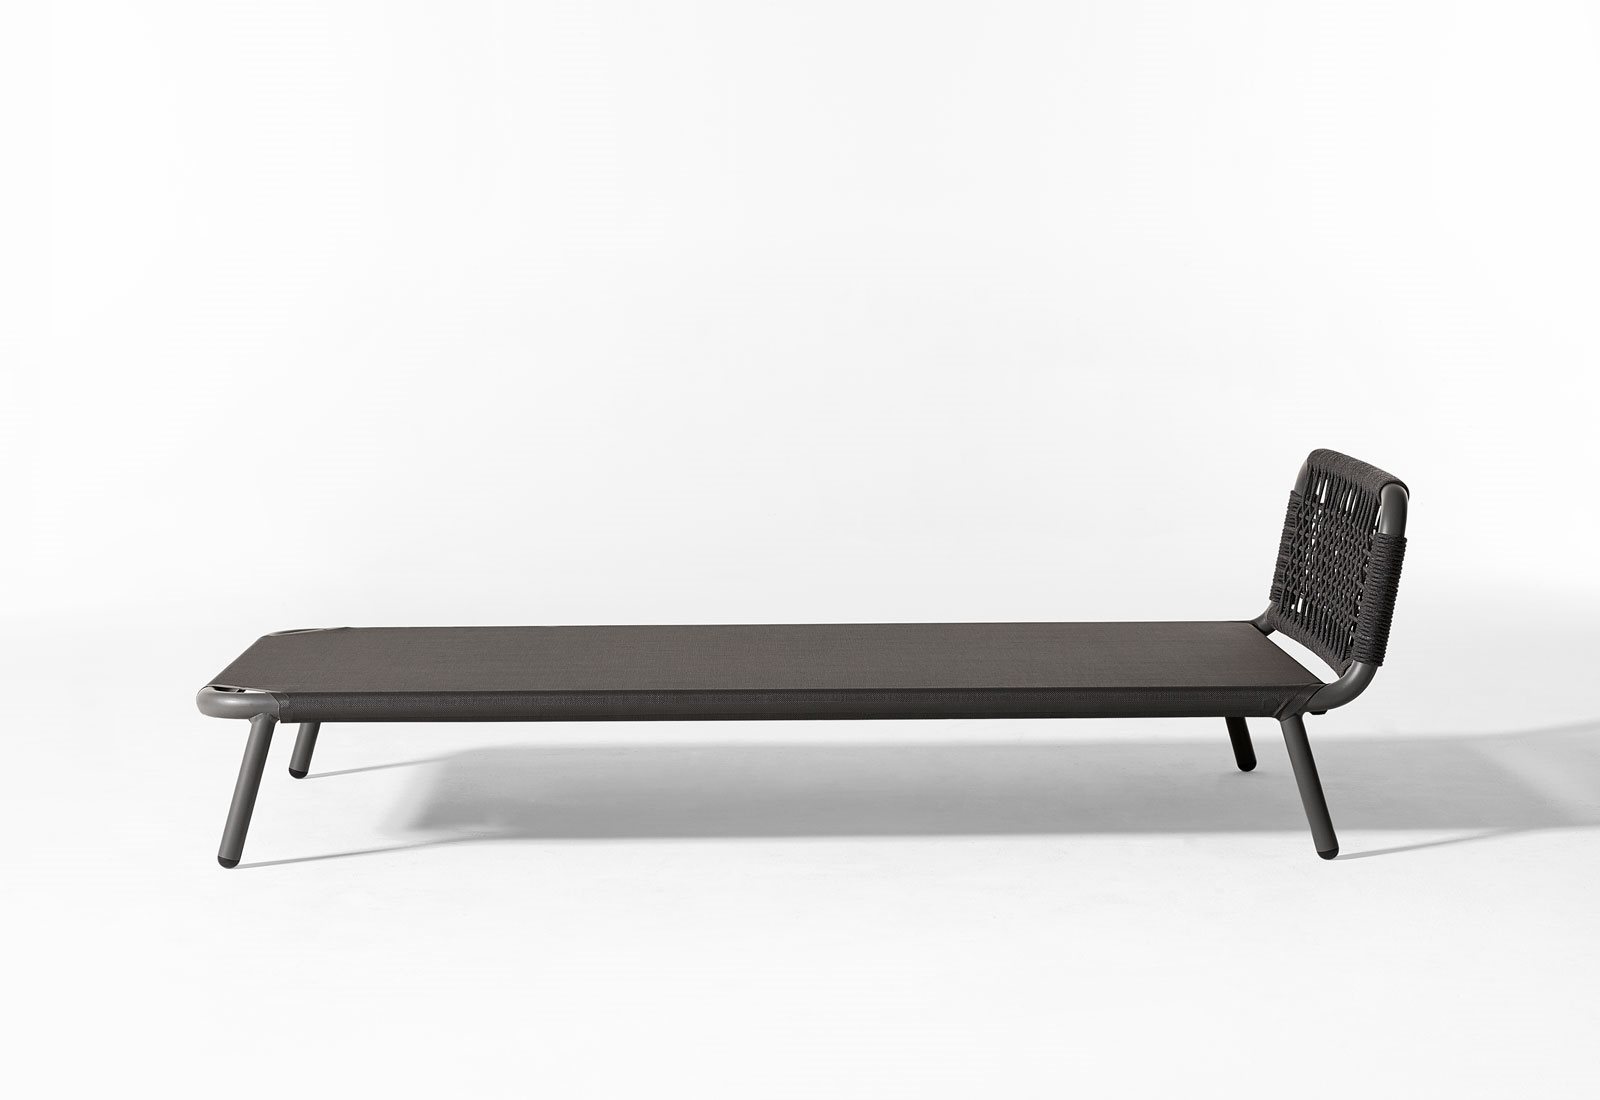 Noa-open-air-lounge-bed-01-1600x1100